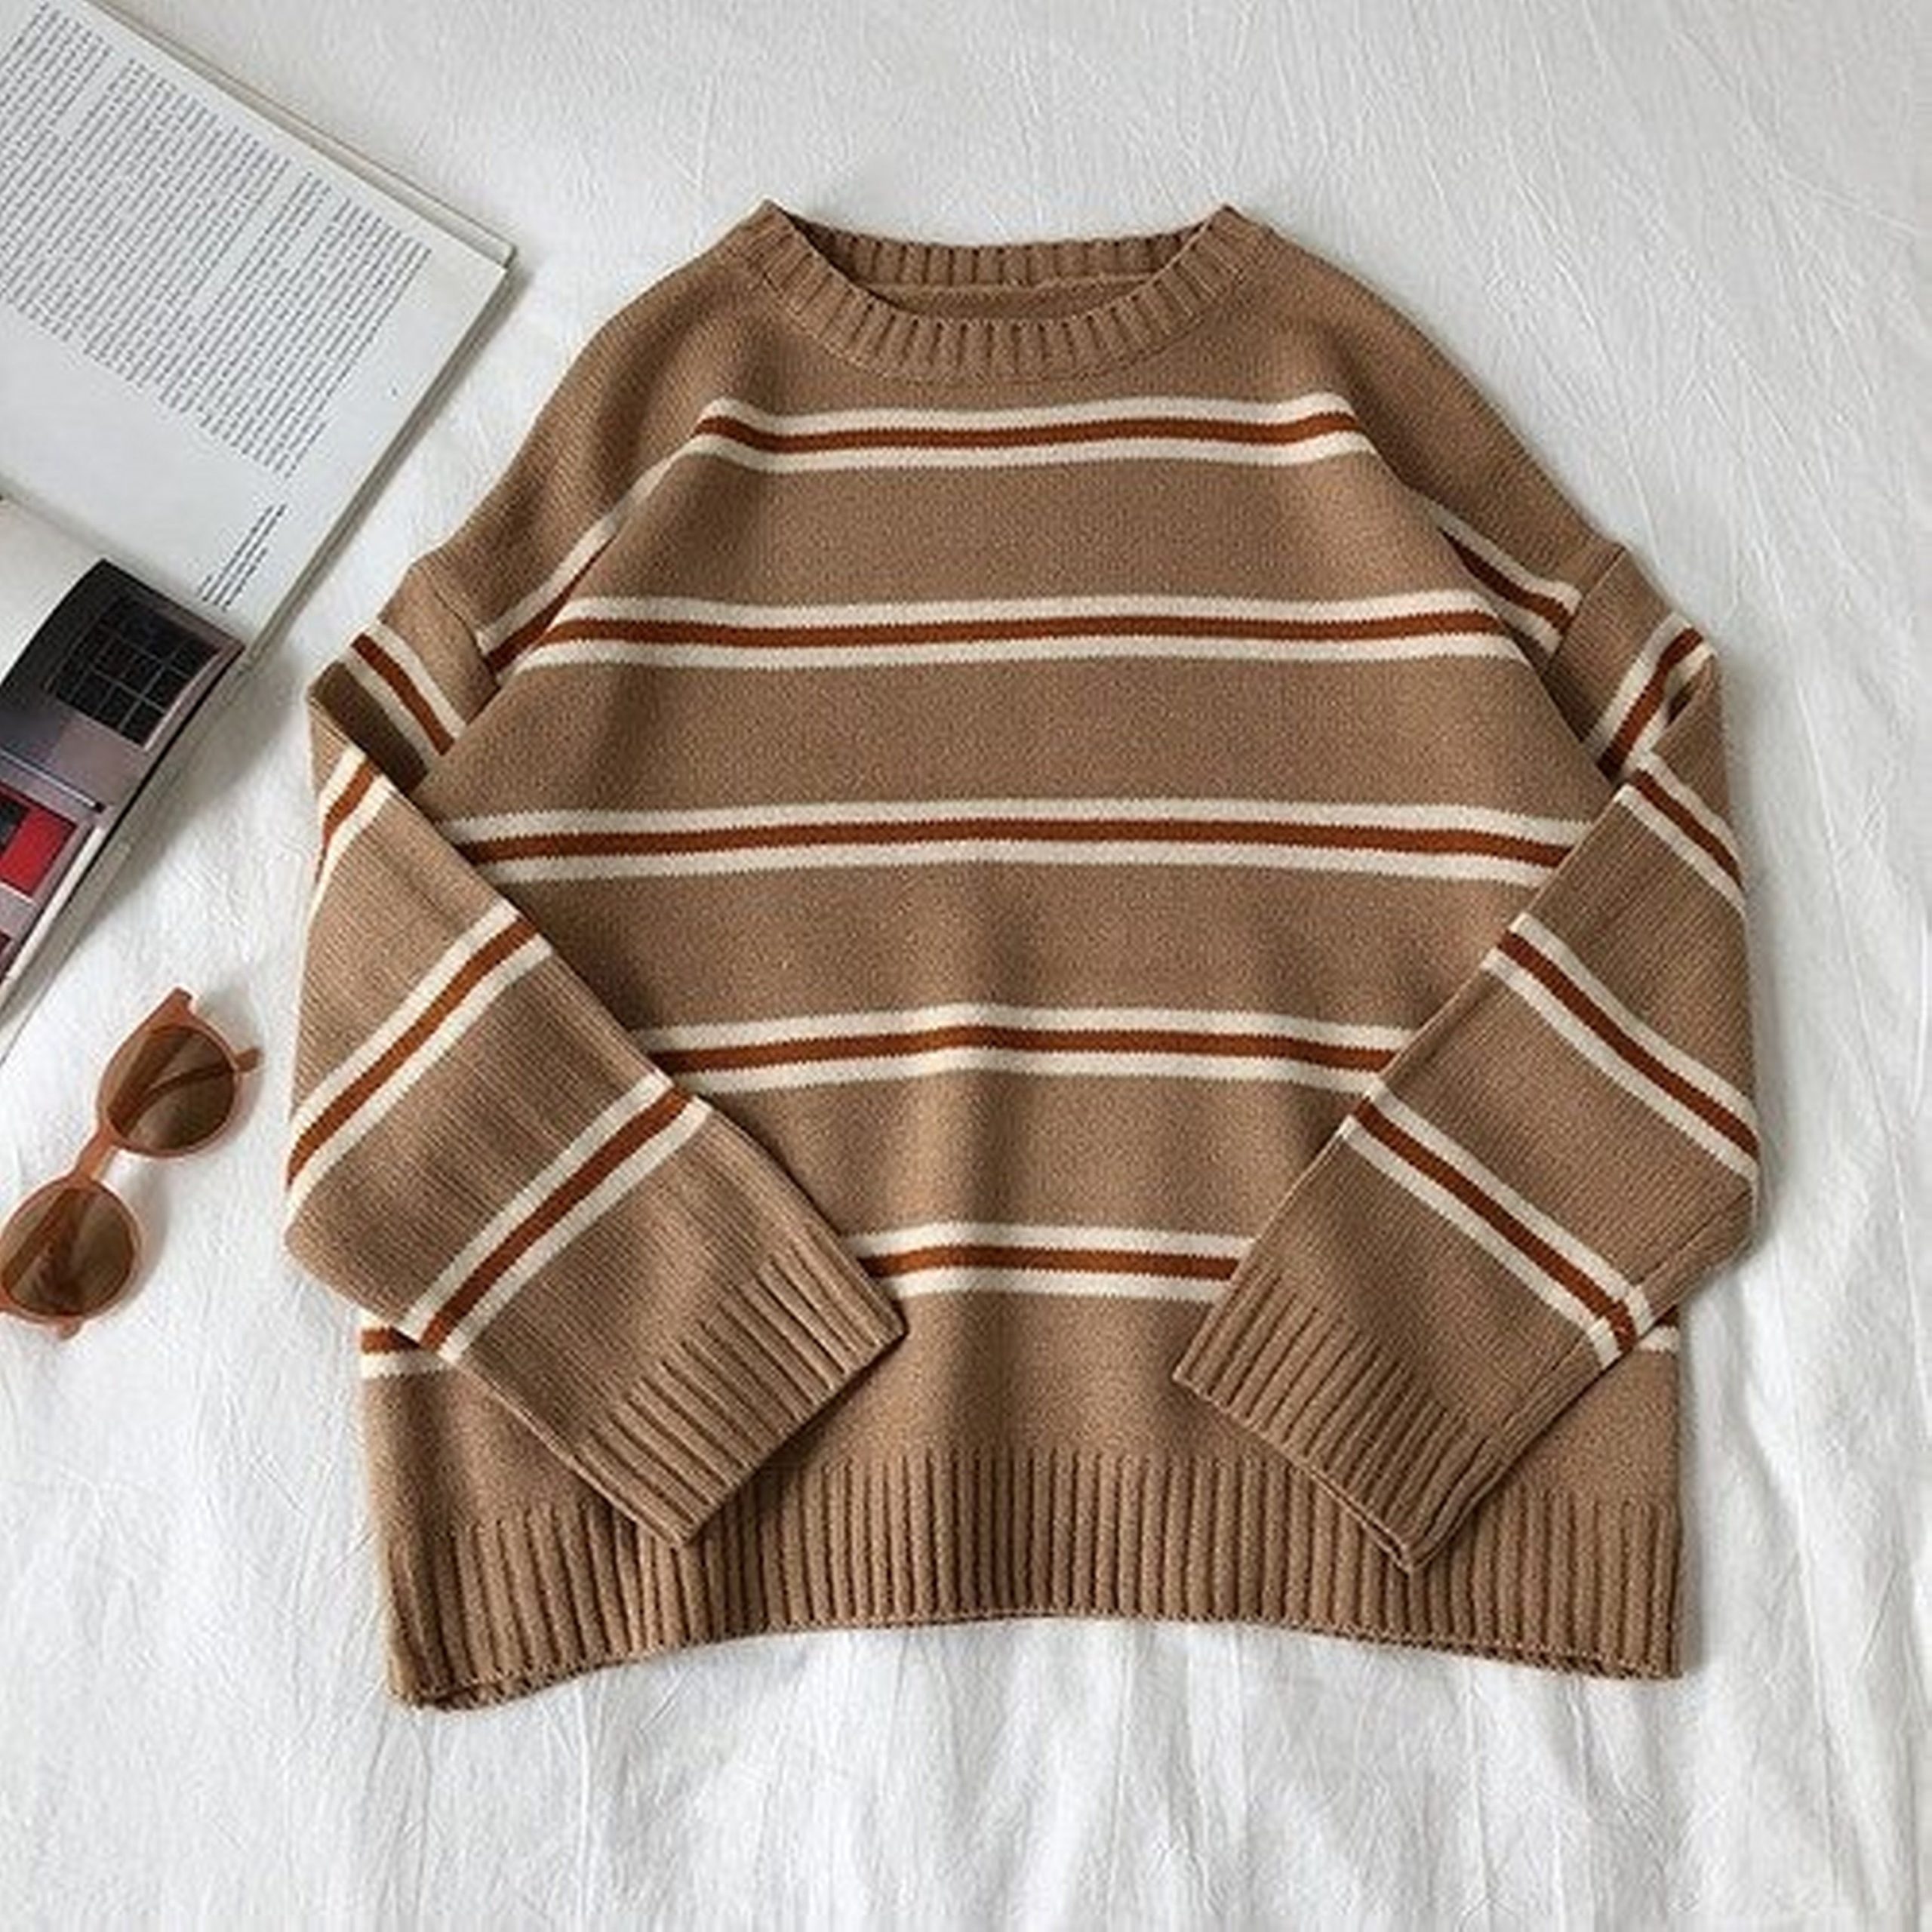 Striped Sweater Vintage Knitted Sweater Brown Streetwear Sweater Casual Pullover Korean Style Sweater Dark Academia